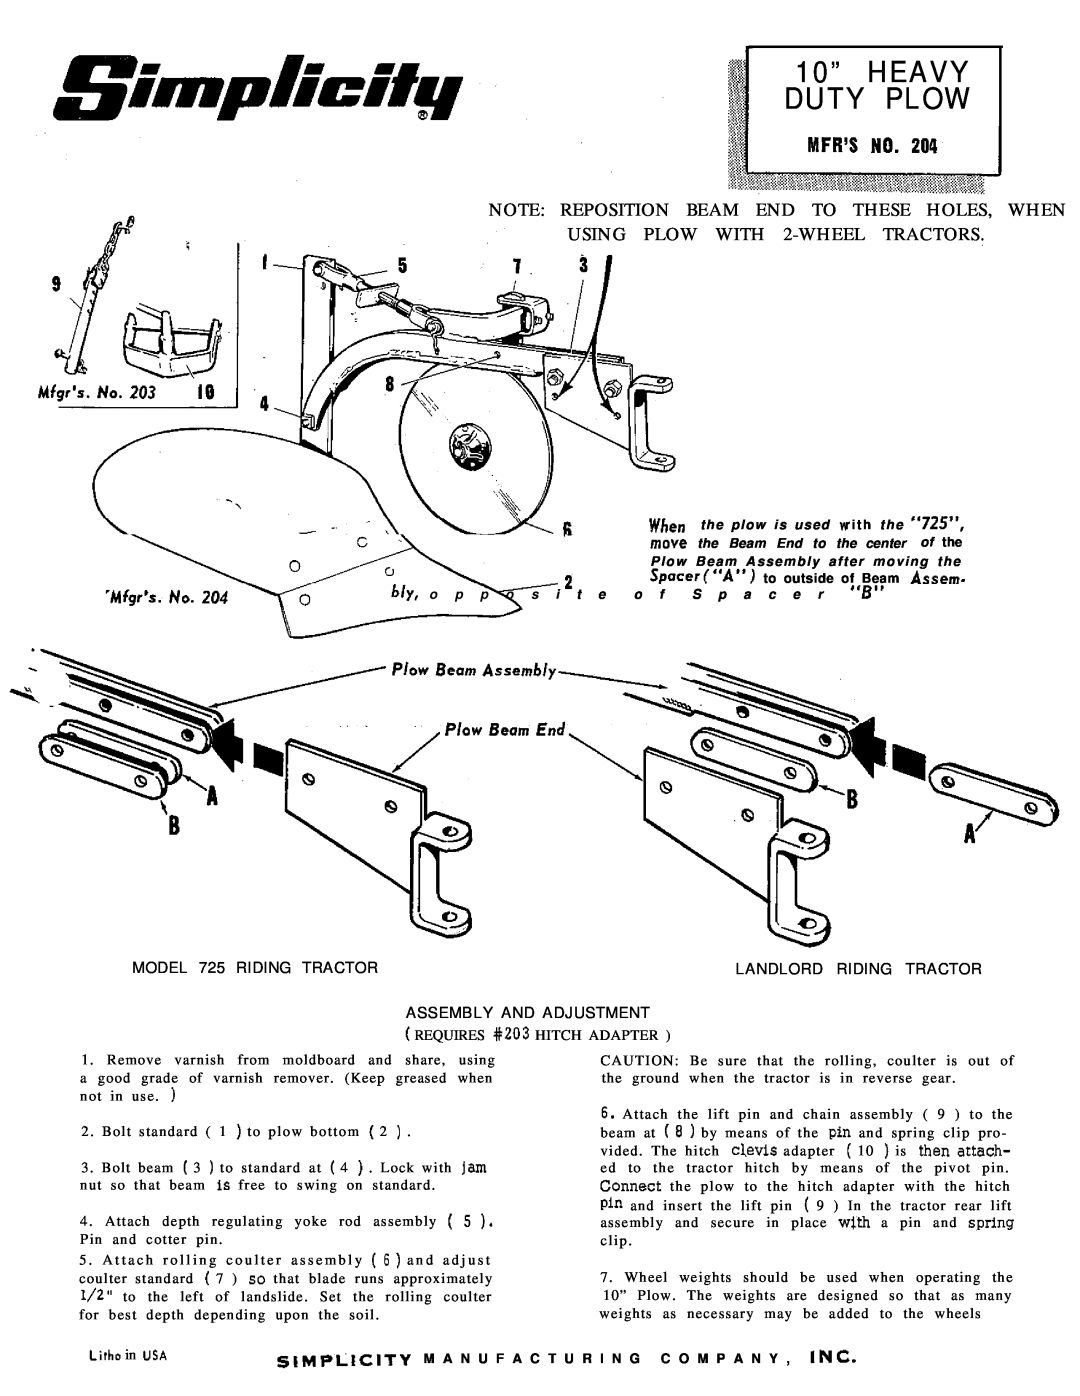 Simplicity 204 manual 10” HEAVY DUTY PLOW, Note Reposition Beam End To These Holes, When, USING PLOW WITH 2-WHEEL TRACTORS 